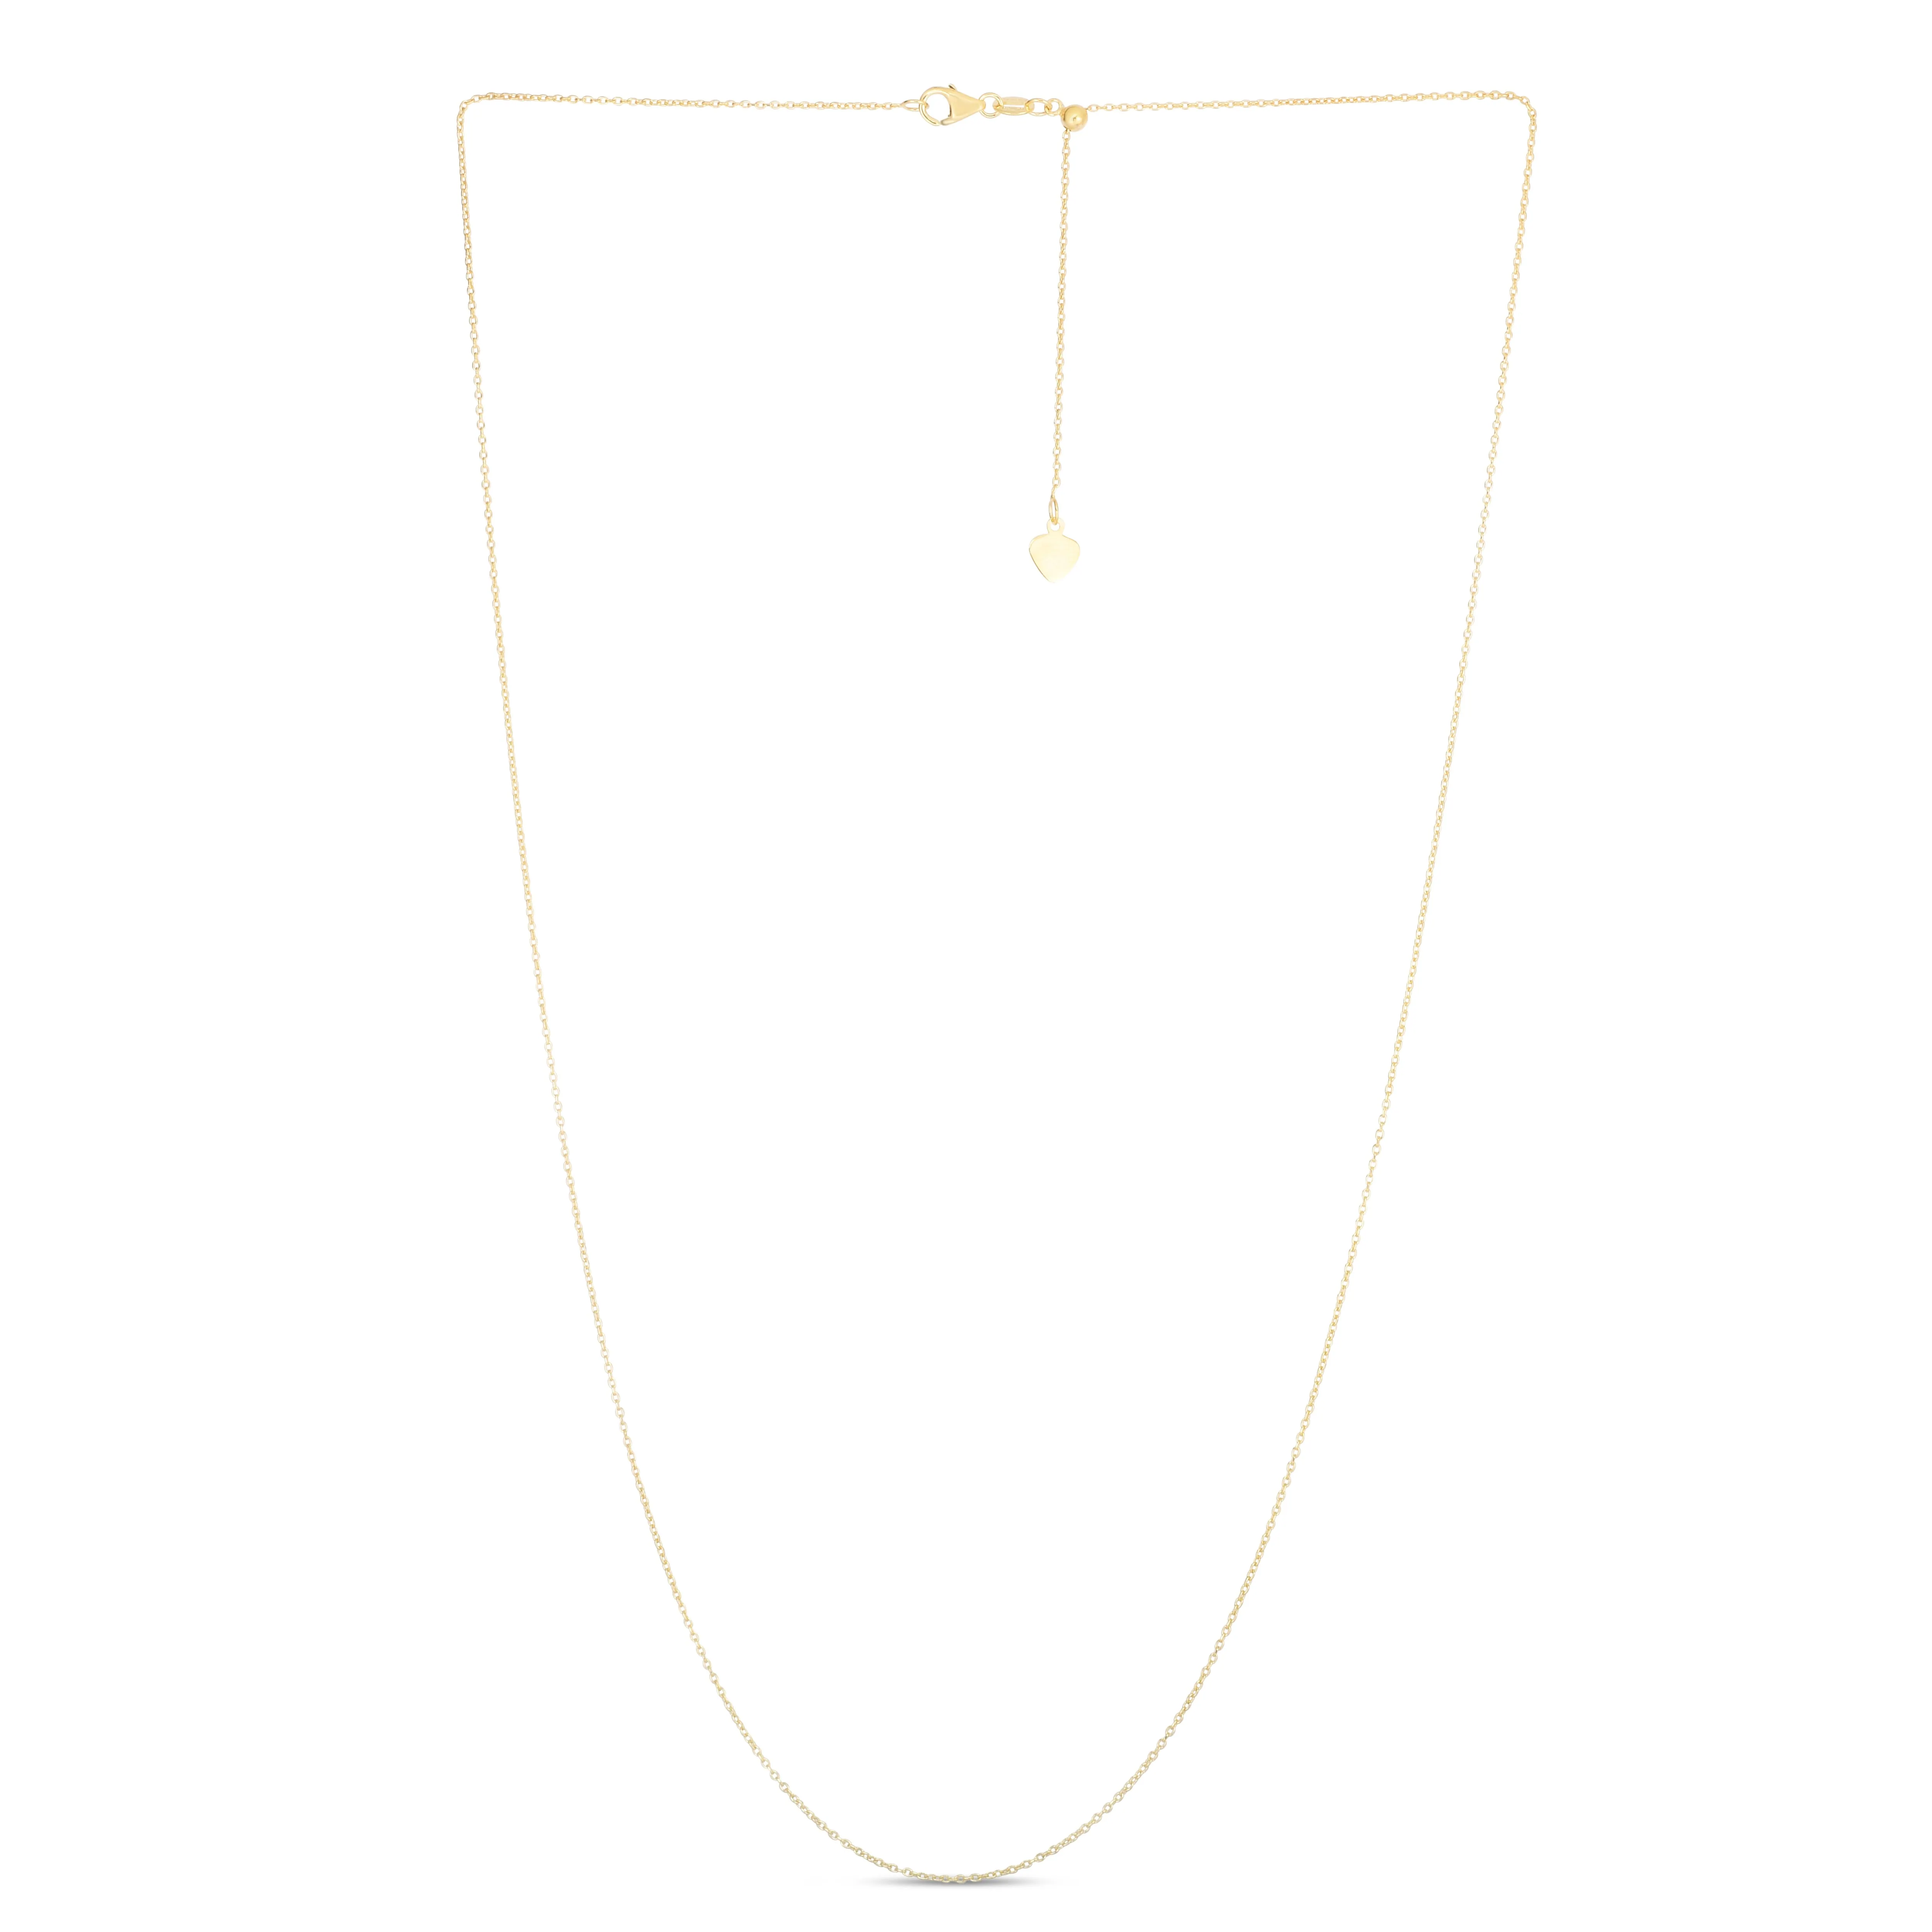 14K Gold 0.97mm Adjustable Cable Chain